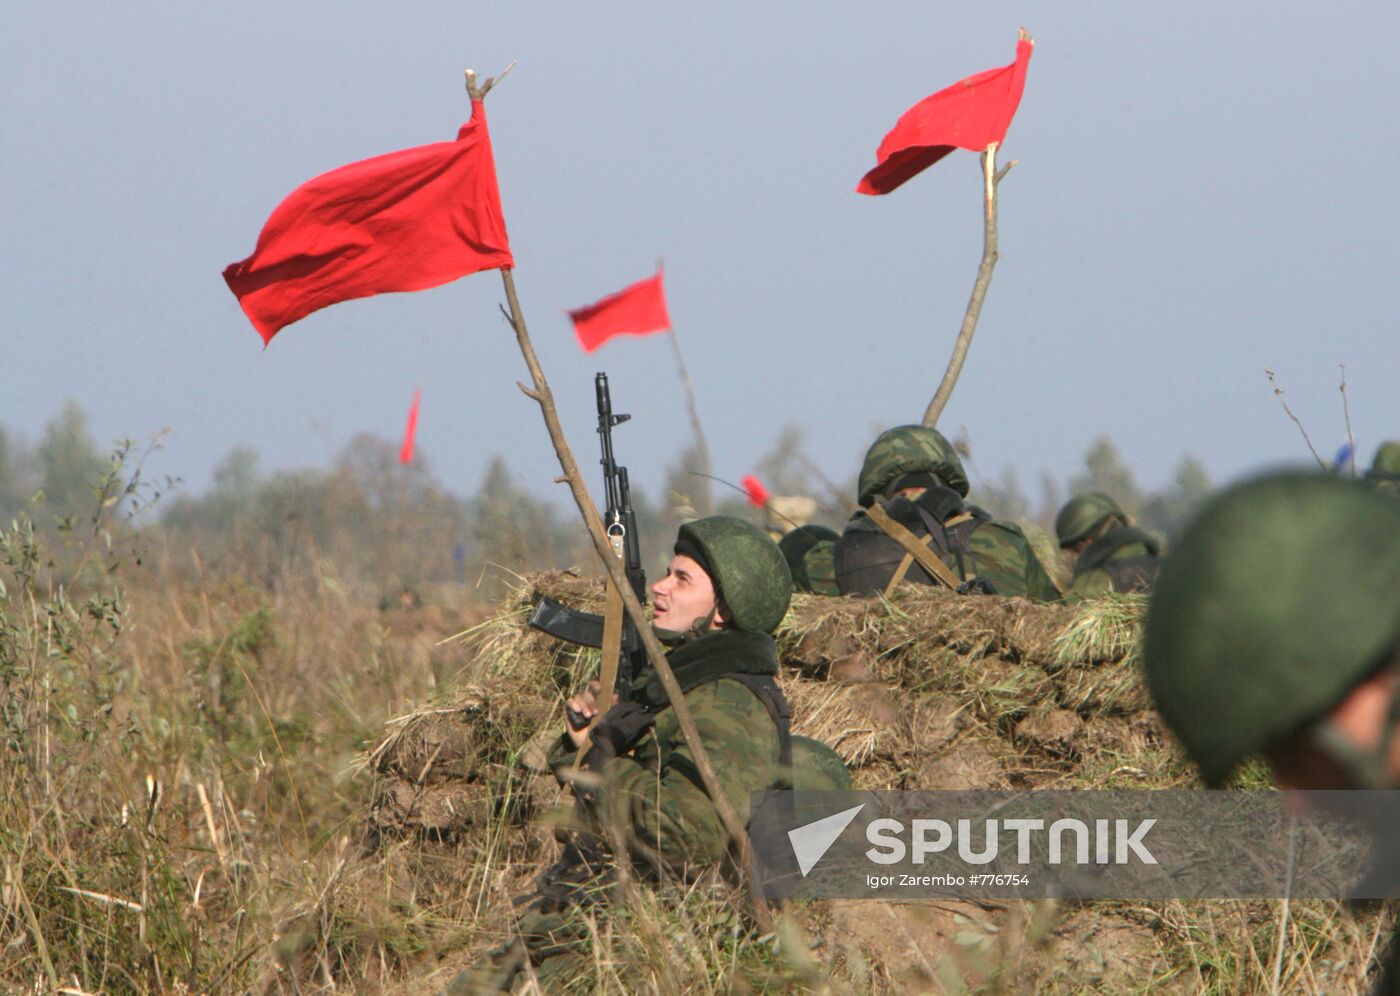 Exercise of coastal defense troops of the Baltic fleet